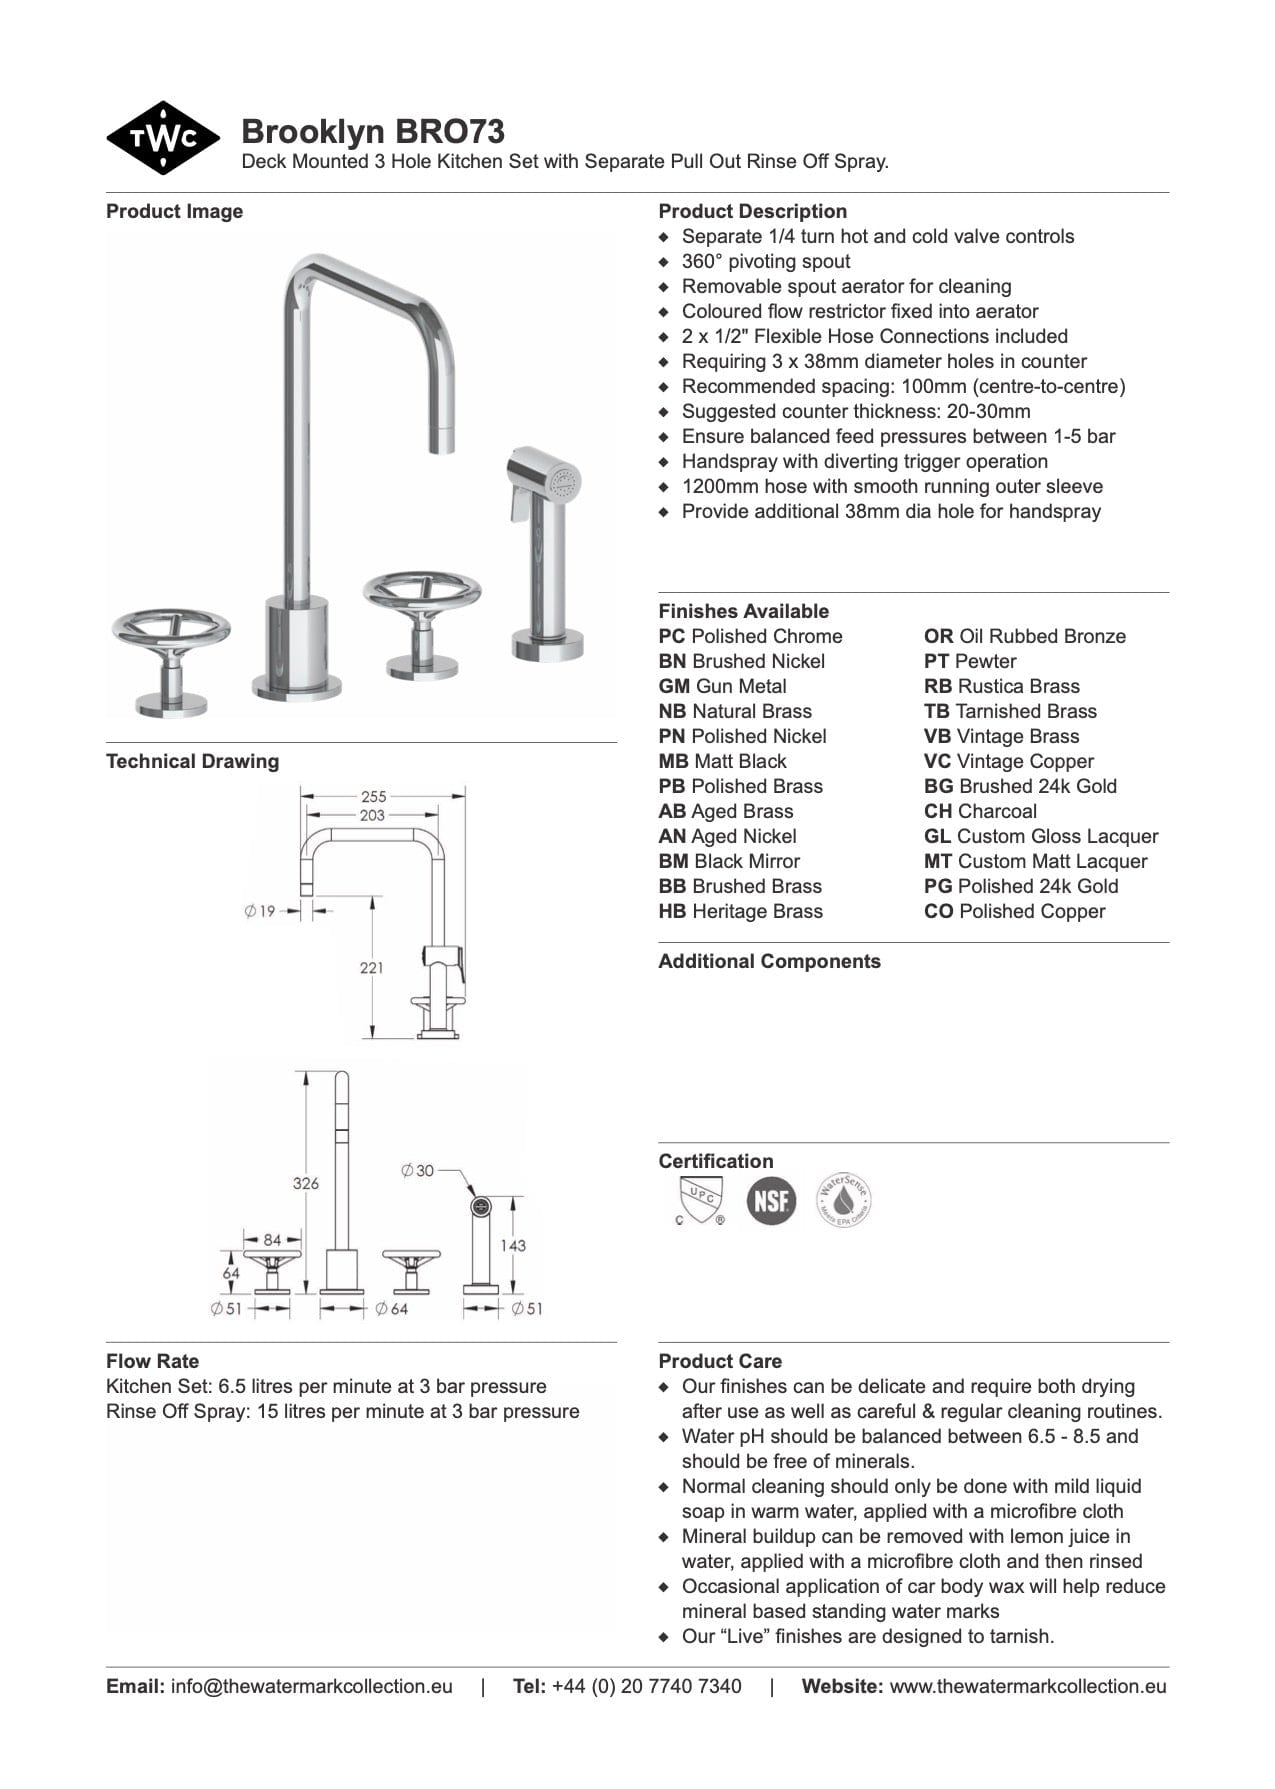 The Watermark Collection Kitchen Taps Polished Chrome The Watermark Collection Brooklyn 3 Hole Kitchen Set with Seperate Pull Out Rinse Spray